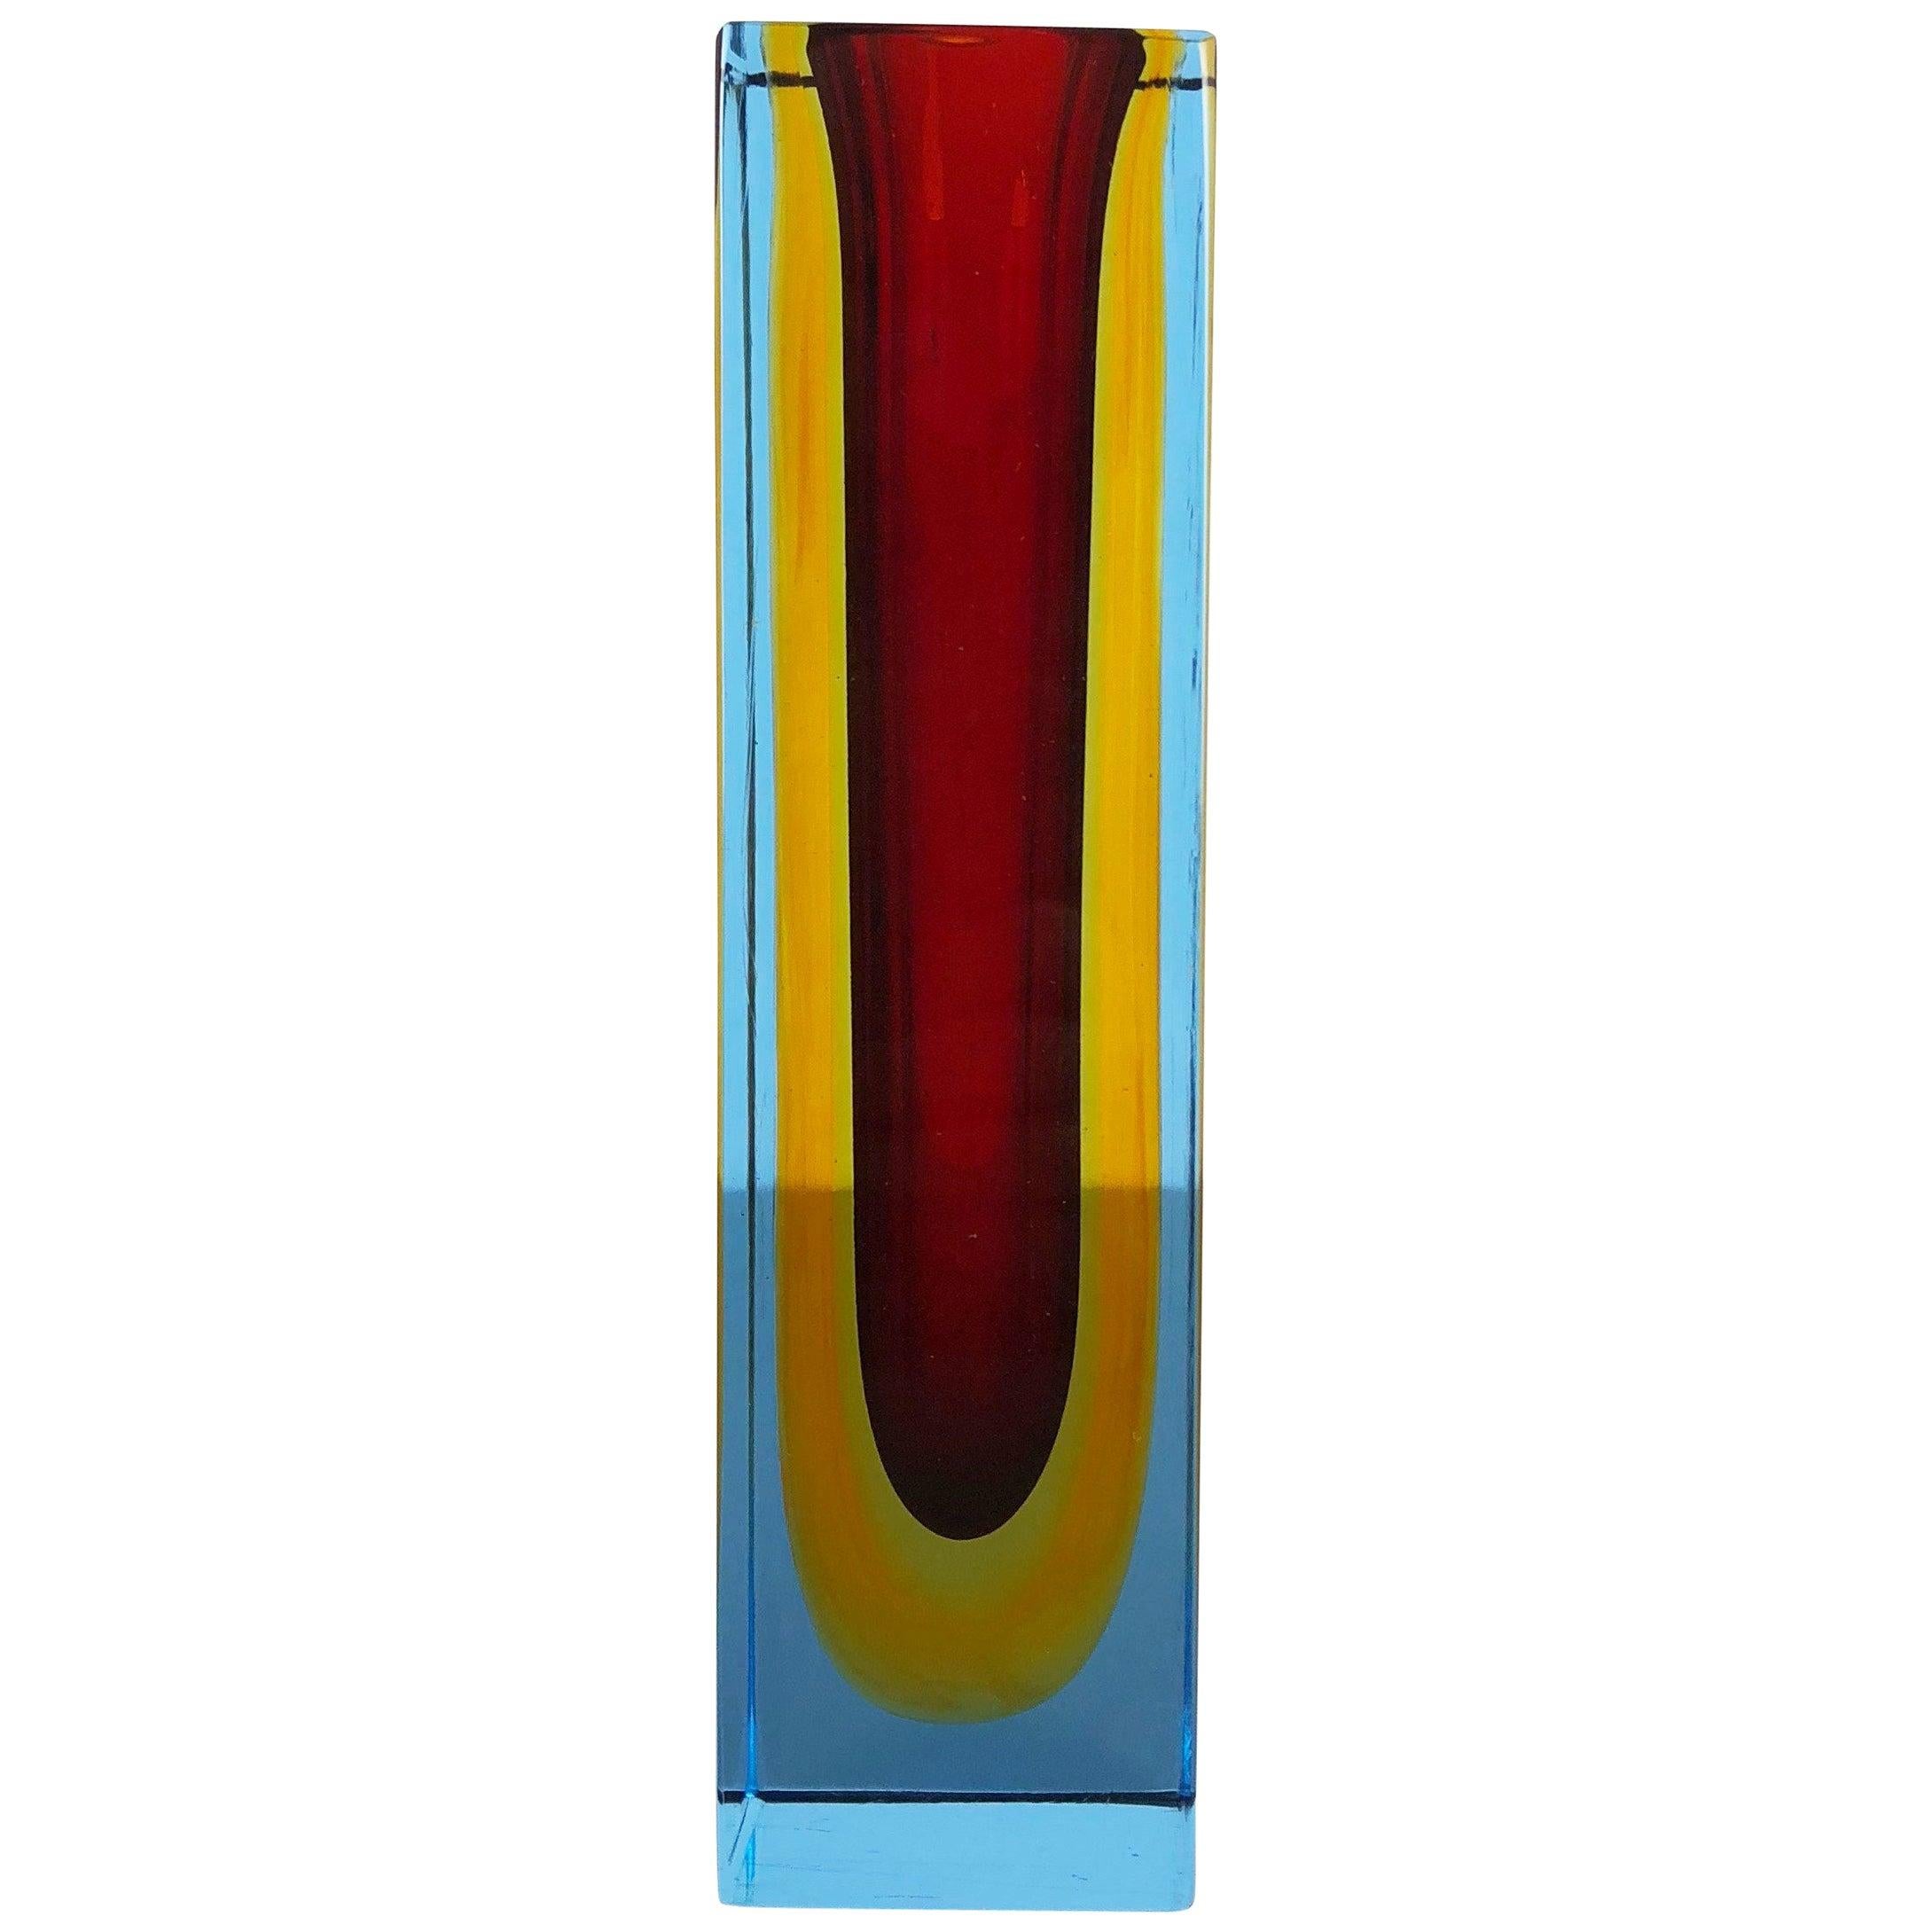 Heavy Large Murano Glass Sommerso Vase Designed by Flavio Poli, Italy, 1970s